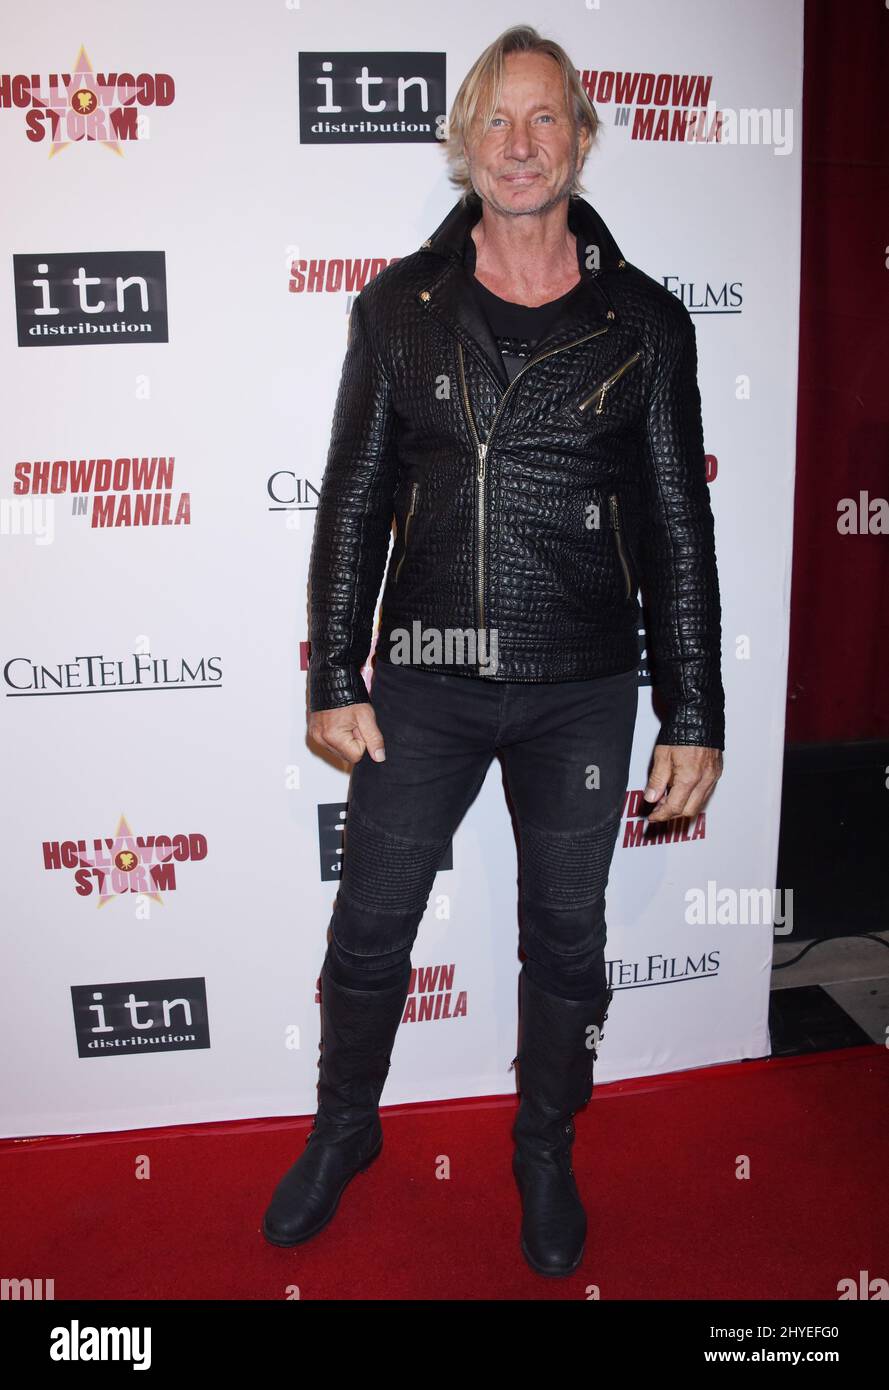 Matthias Hues at ITN Distribution's 'Showdown In Manila' Los Angeles Premiere held at the Laemmle Ahrya Fine Arts Theatre on January 22, 2018 in Beverly Hills, CA. Stock Photo